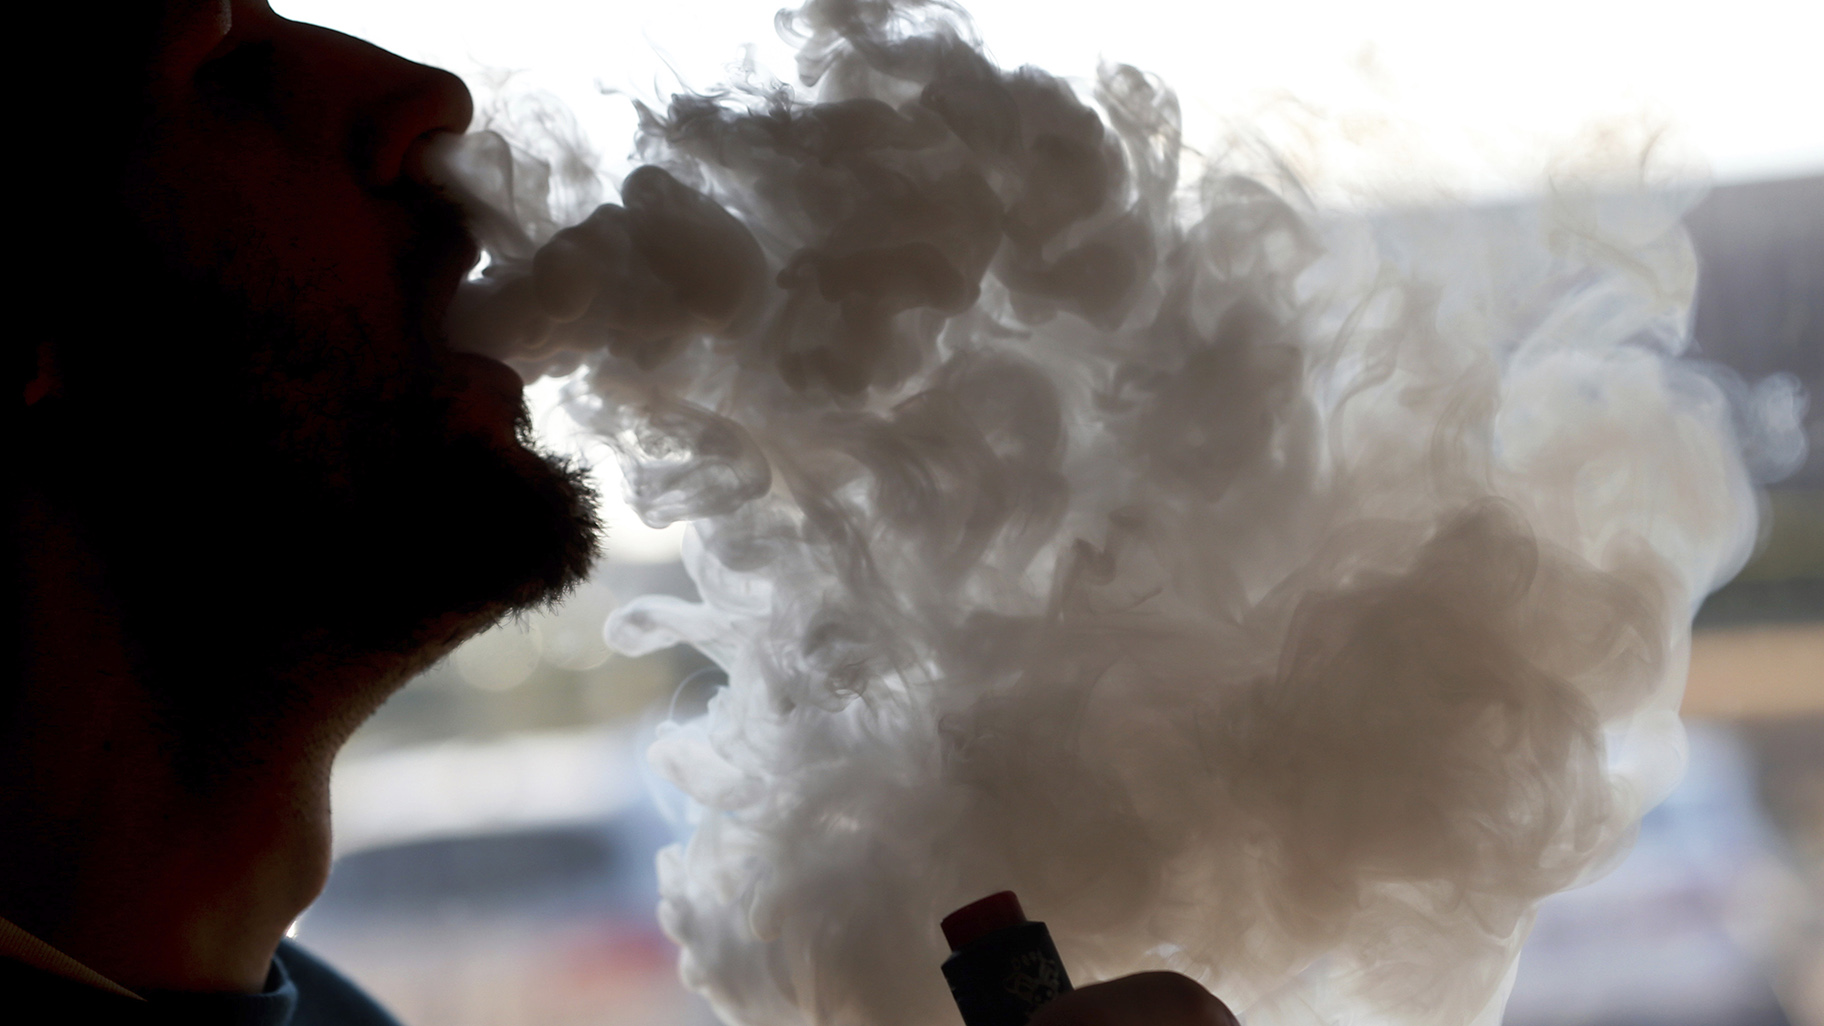 US Official Expects ‘Hundreds More’ Cases of Vaping Illness | Chicago ...